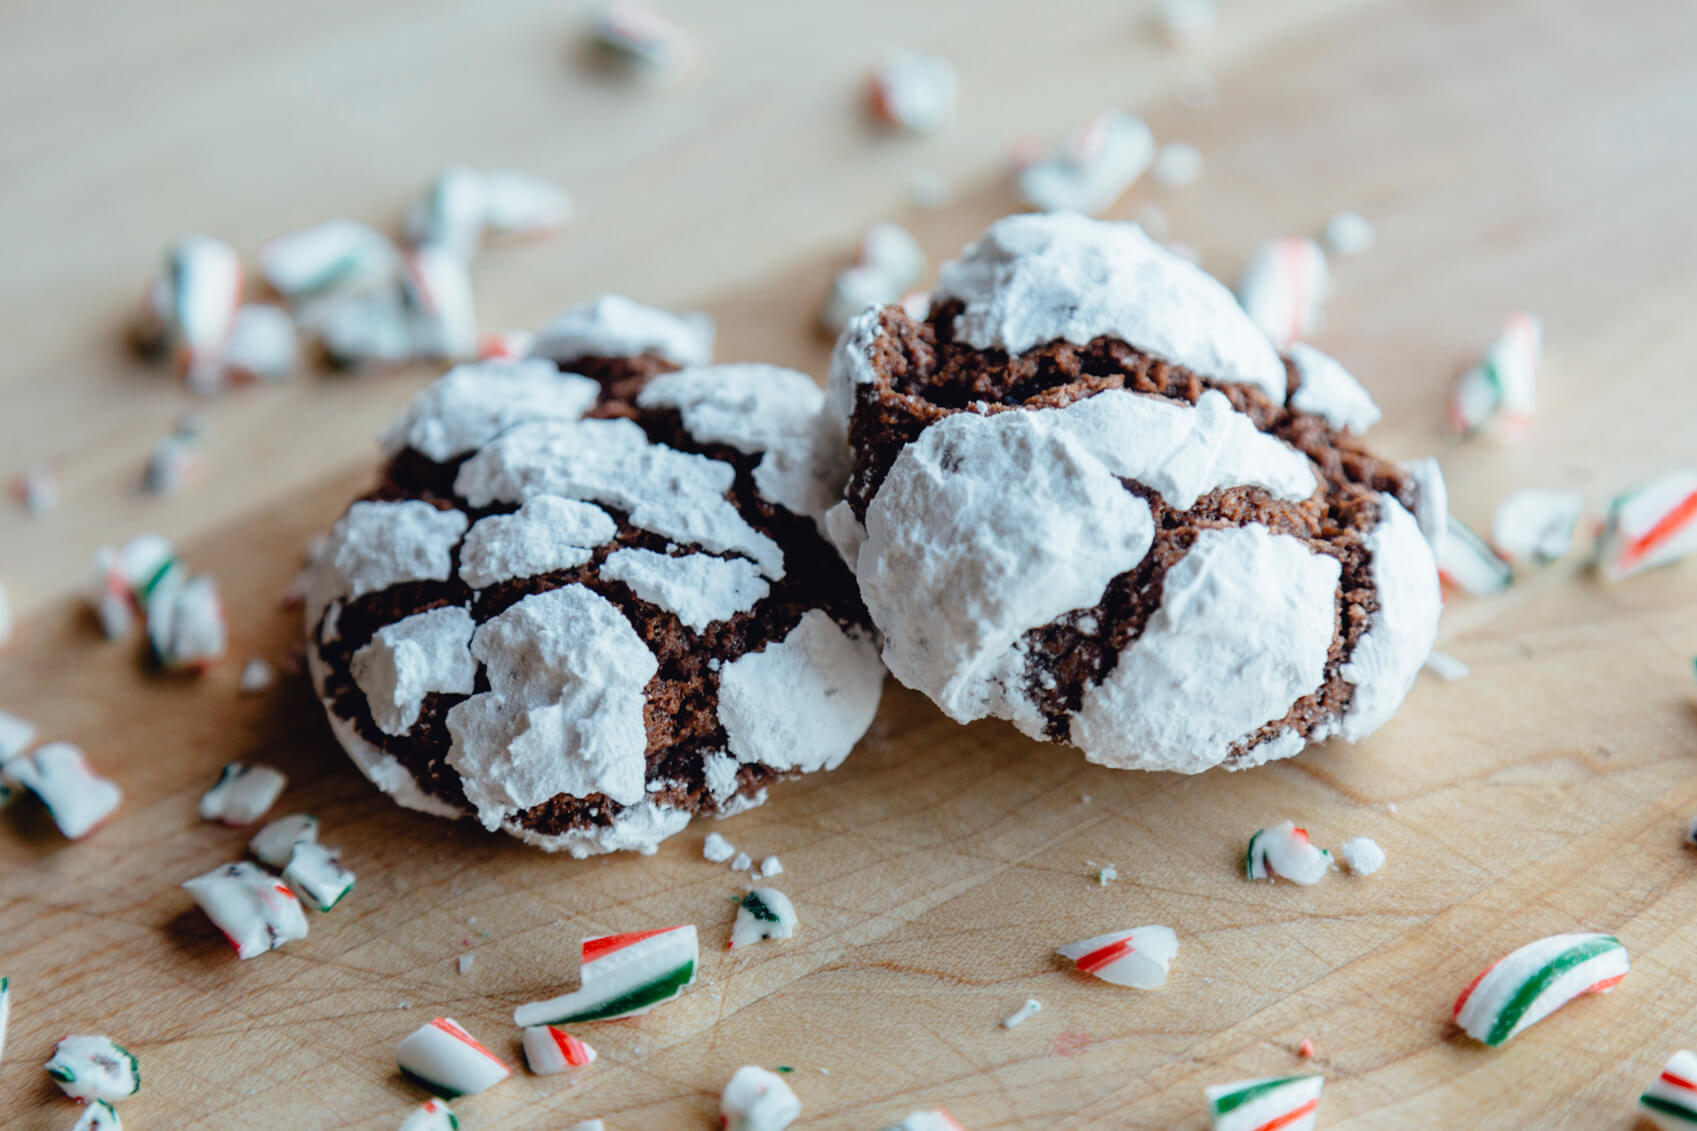 These chocolate crinkle cookies are just the thing your holidays need.